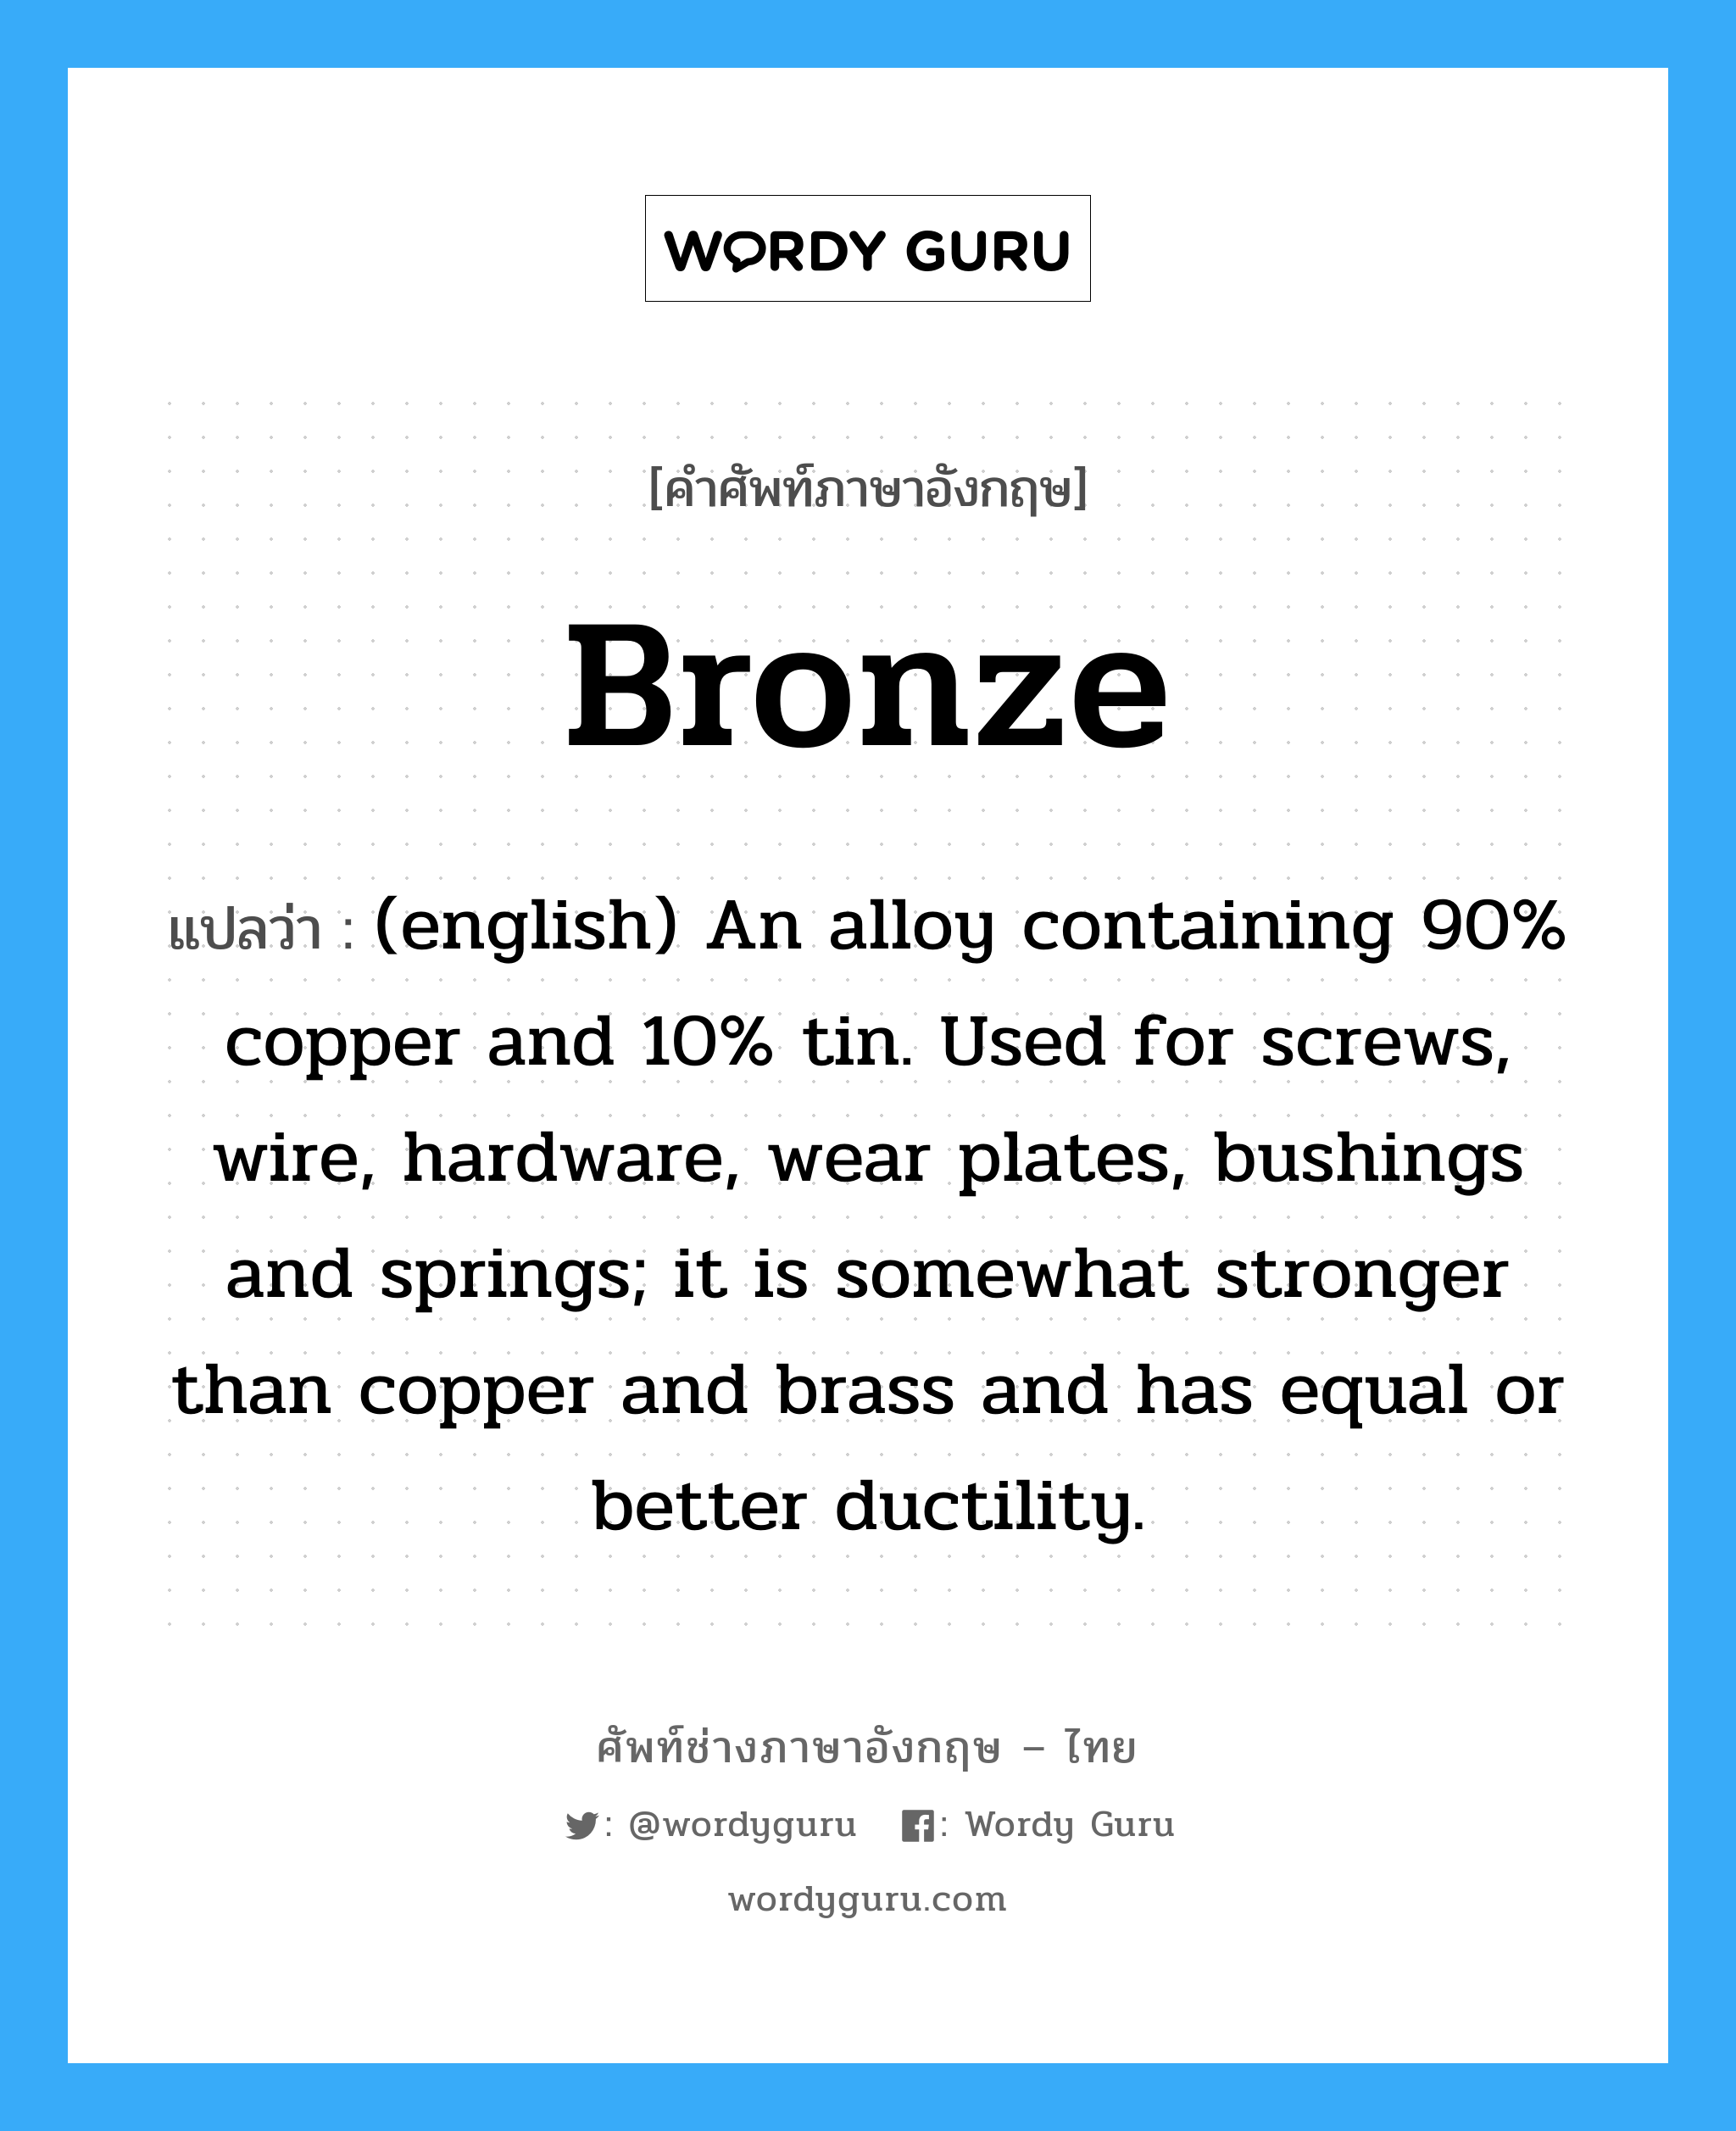 Bronze แปลว่า?, คำศัพท์ช่างภาษาอังกฤษ - ไทย Bronze คำศัพท์ภาษาอังกฤษ Bronze แปลว่า (english) An alloy containing 90% copper and 10% tin. Used for screws, wire, hardware, wear plates, bushings and springs; it is somewhat stronger than copper and brass and has equal or better ductility.